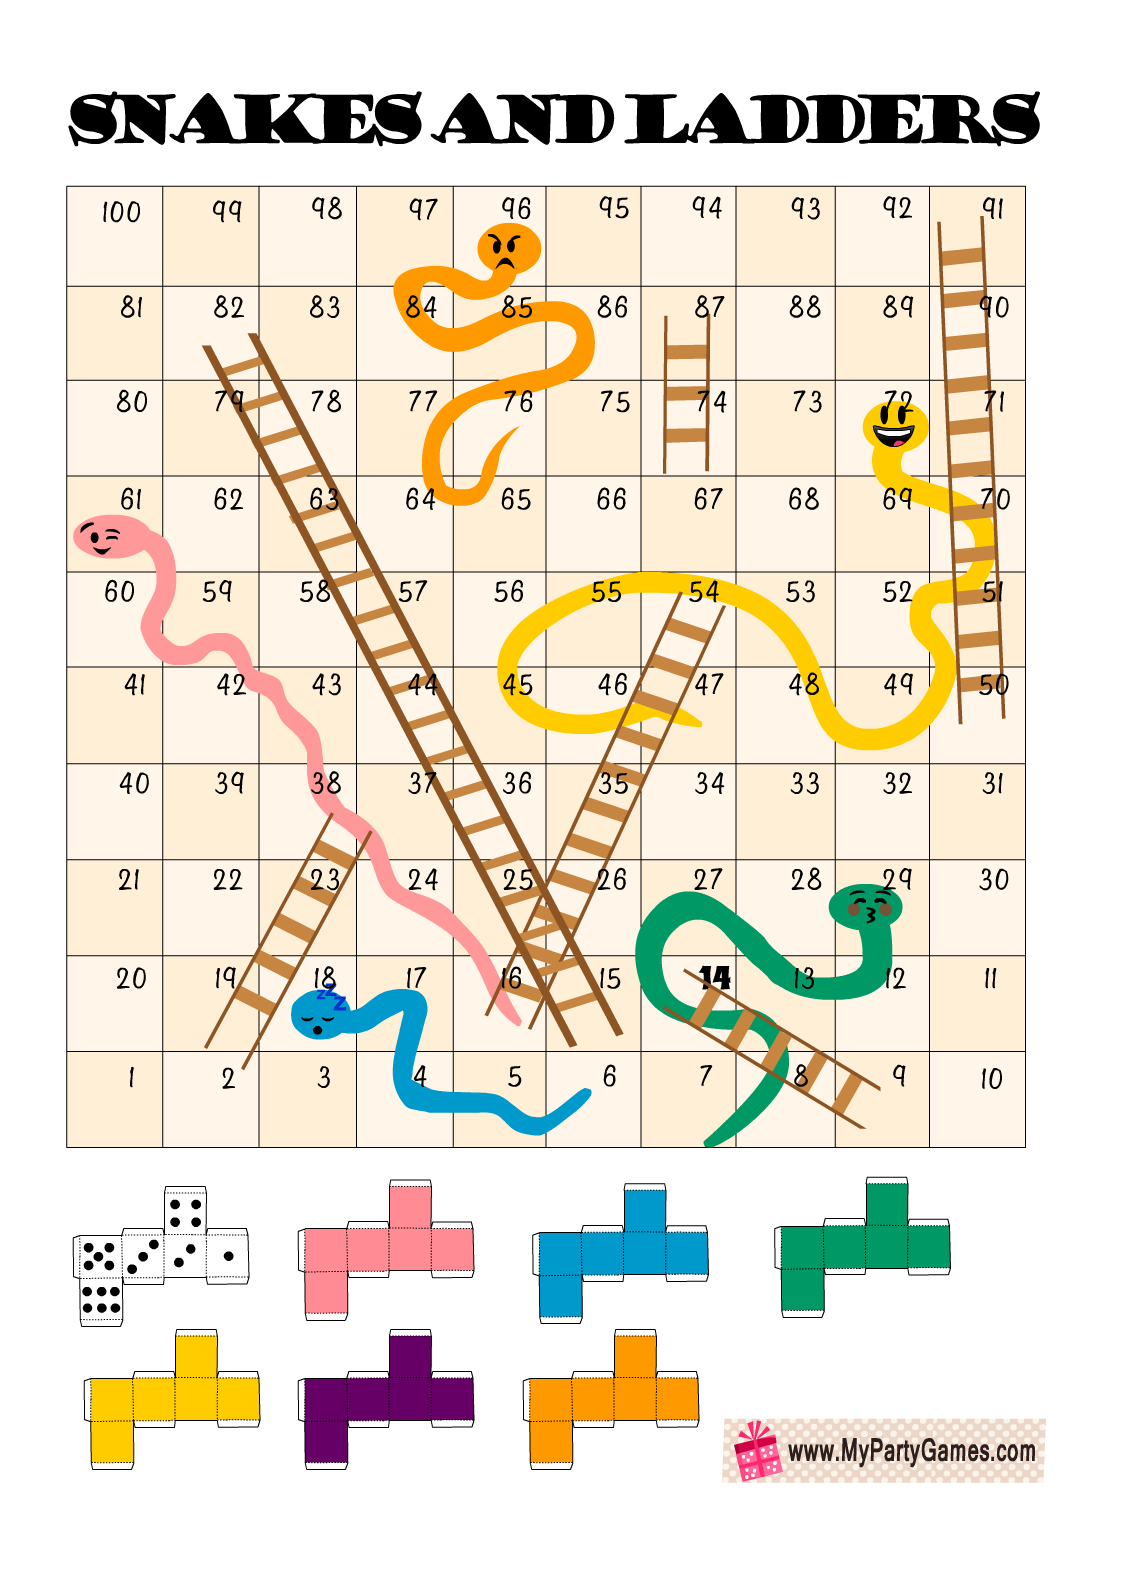 snakes-and-ladders-board-game-5-free-printables